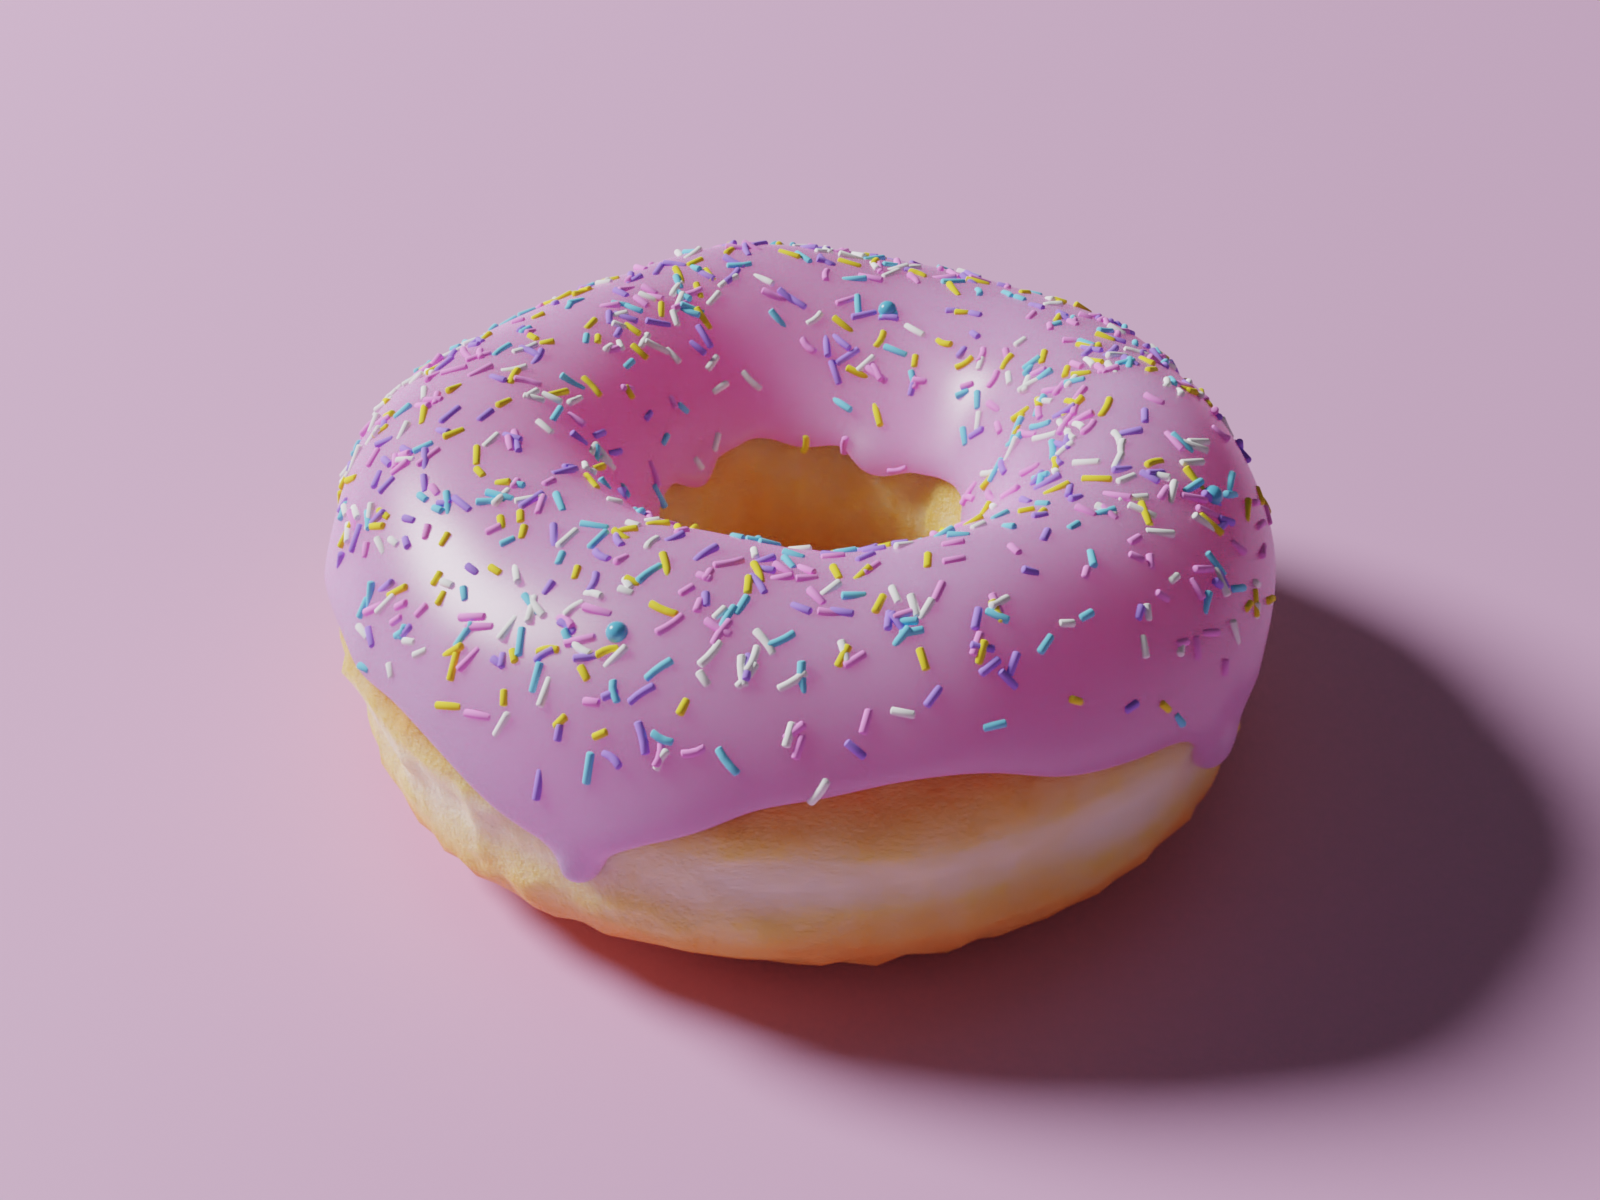 3D donut 🍩 by Michael Hobson on Dribbble